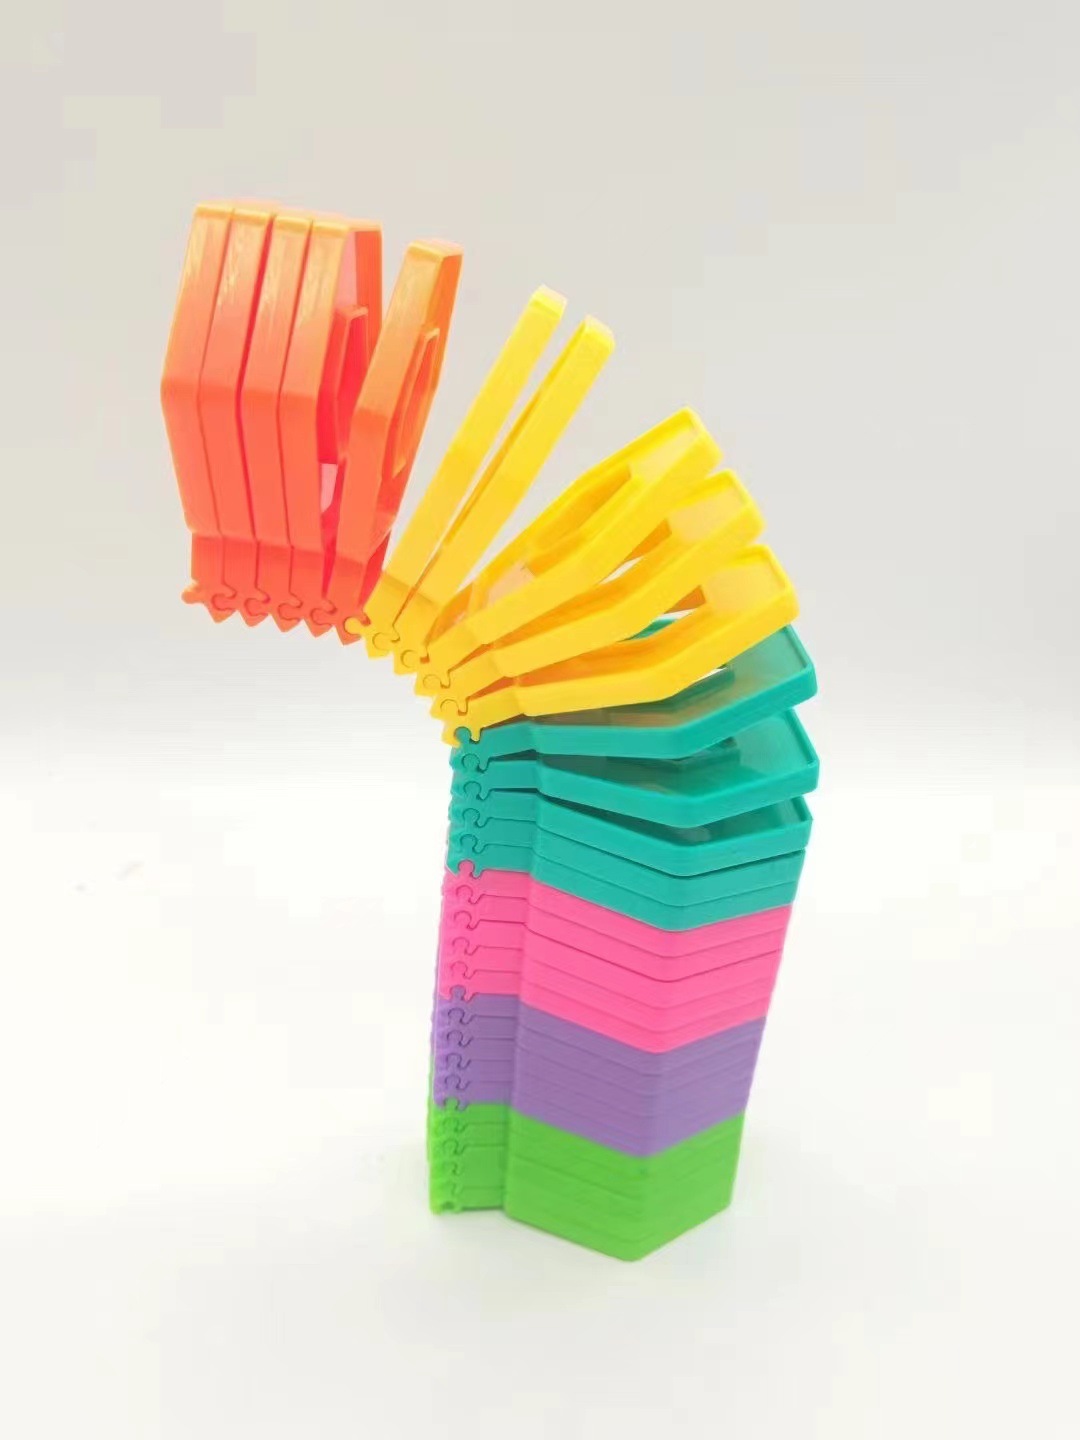 New Product Pai Pai Le Puzzle Decompression Toy Cool Colored Ring Jenga Hula Hoop Puzzle Decompression Toy